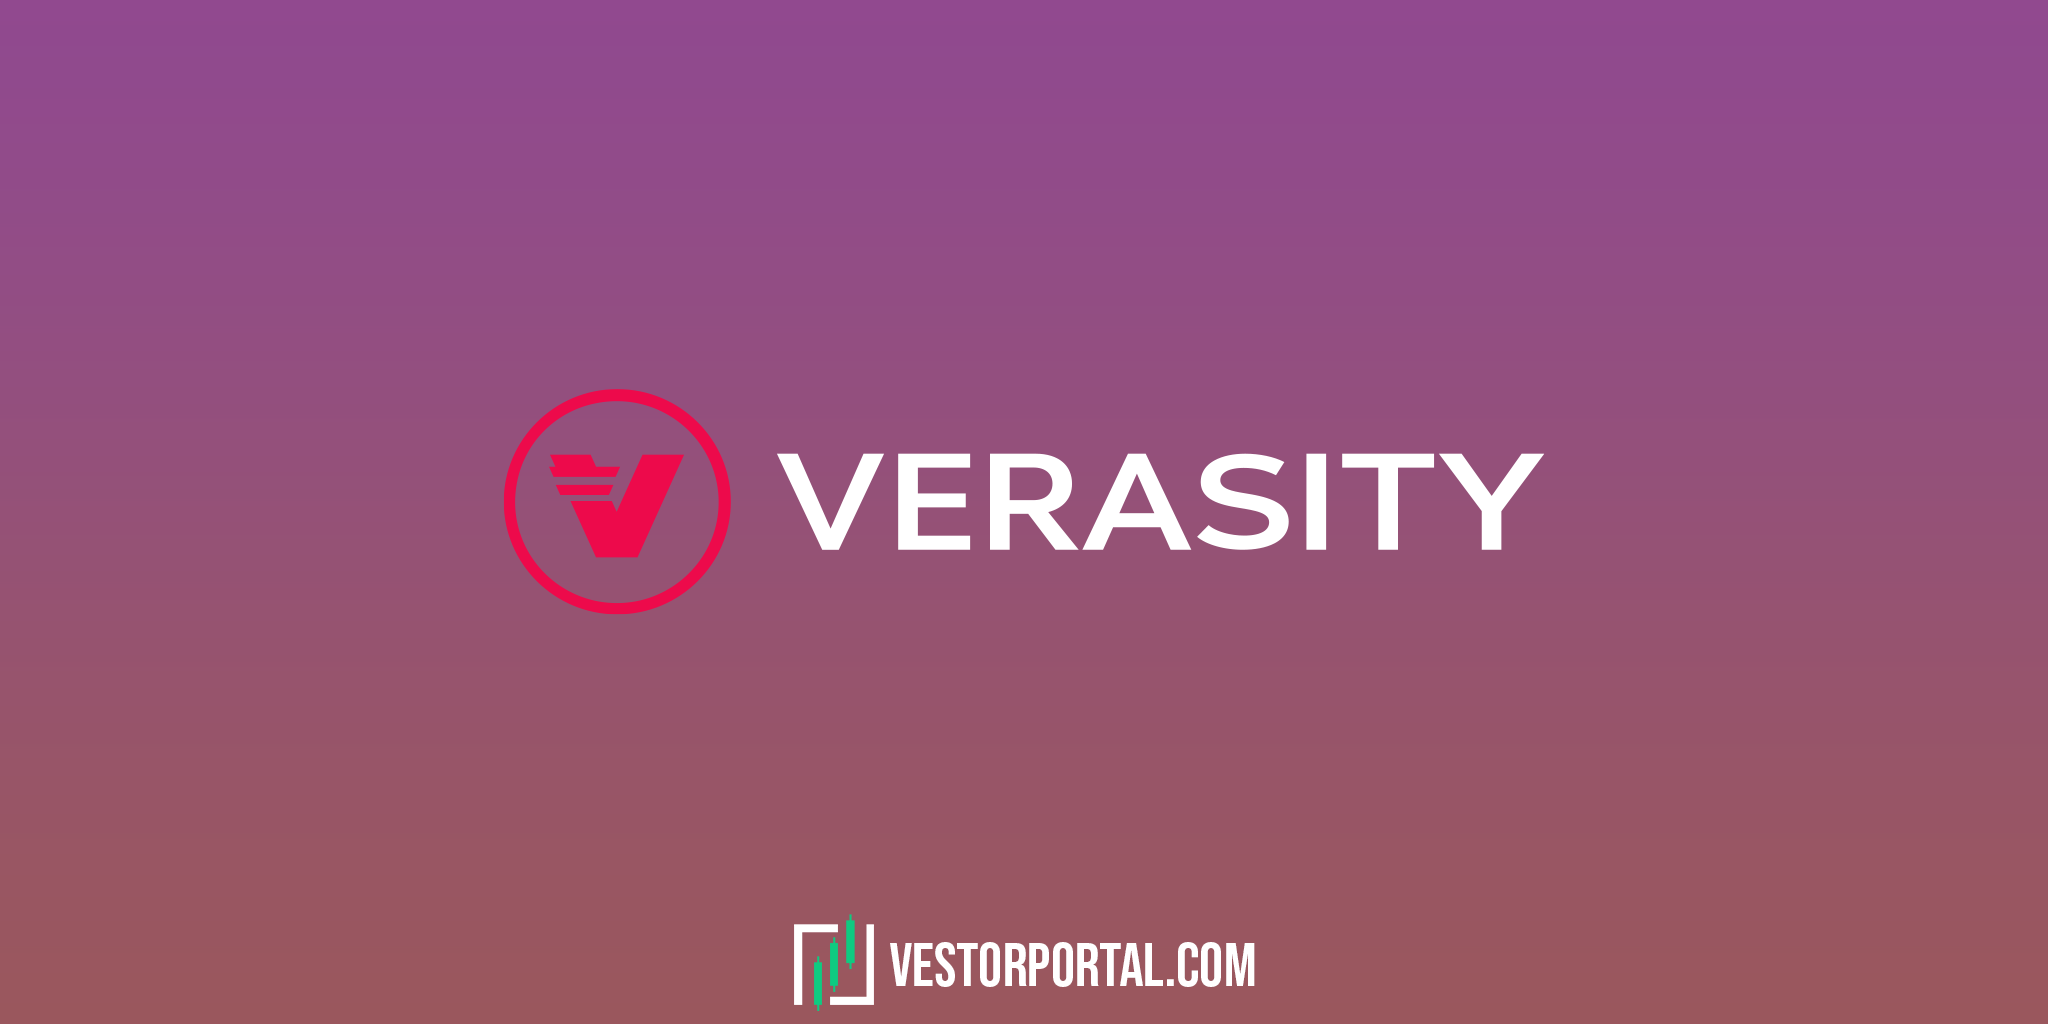 Verasity - Learn more about this future Ad-Technology Giant